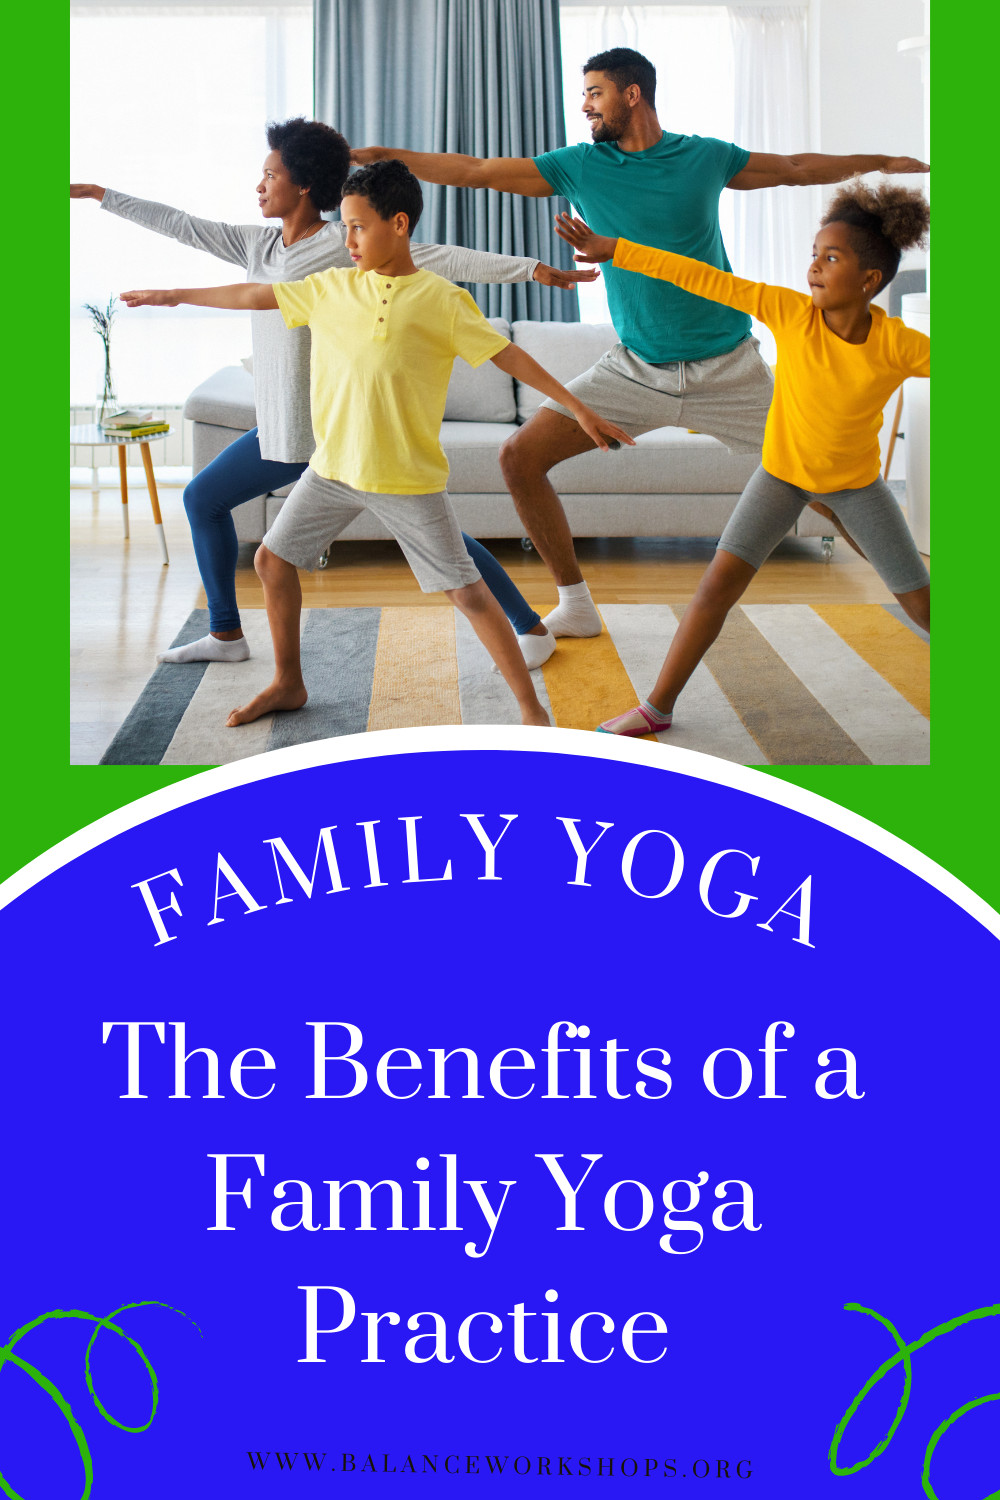 The Benefits of a Family Yoga Practice